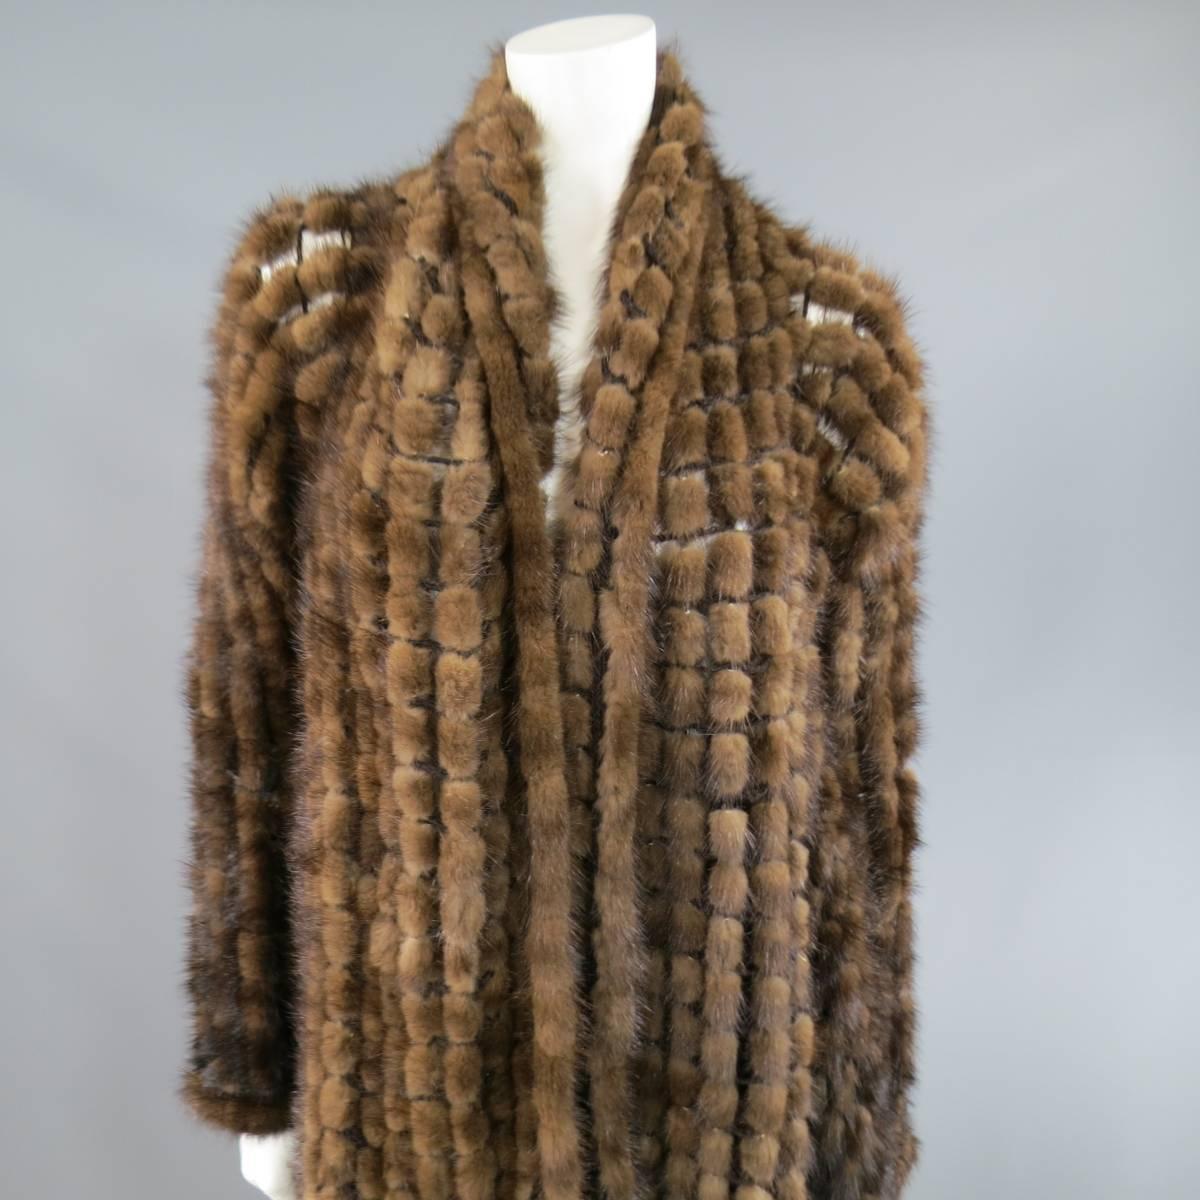 This fabulous ADRIENNE LANDAU fur cardigan comes in a large scale fishnet mesh with mink fur woven in throughout and features an extended long shawl collar, open front, and cropped back.
 
Excellent Pre-Owned Condition.
One Size.
